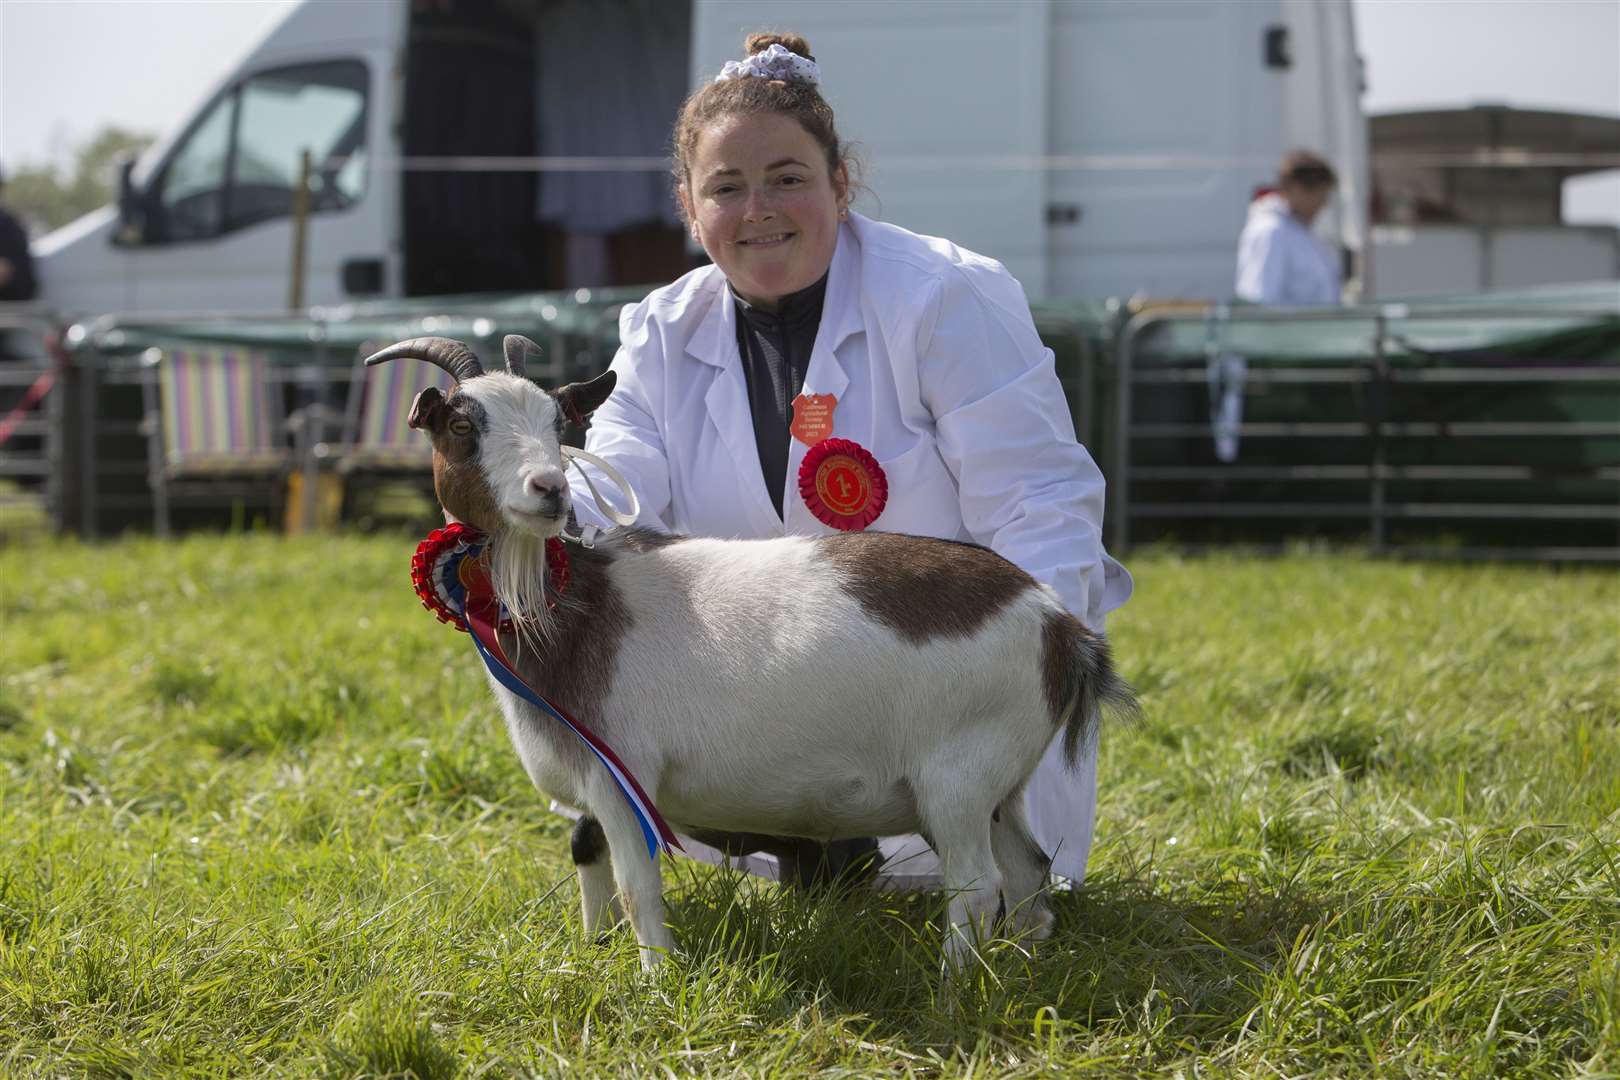 Claire Lowe, Rampyards, Watten, with her champion goat, Milly, an 11-year-old pygmy. Claire was winning her first championship, stepping up from the reserve position last year. Picture: Robert MacDonald / Northern Studios